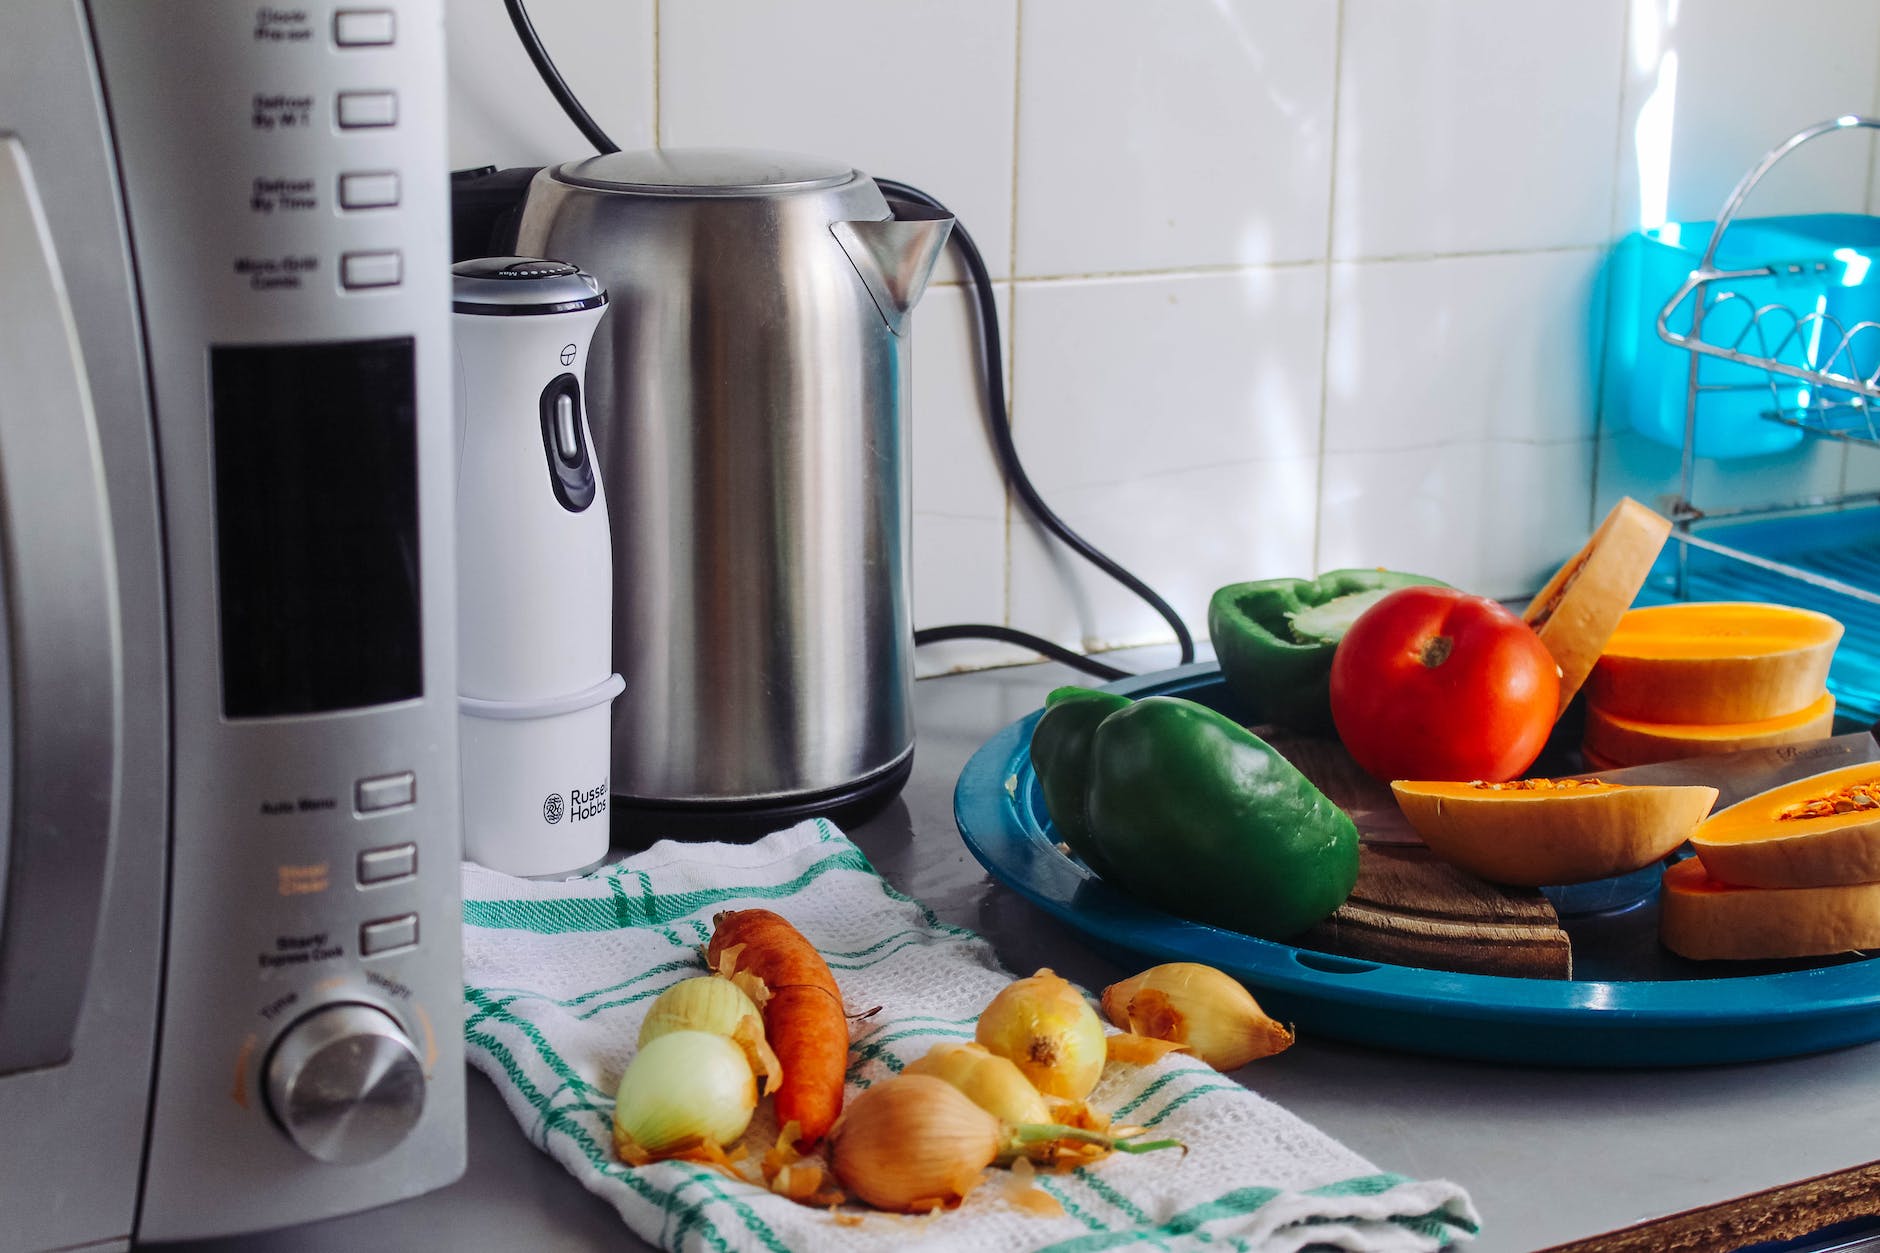 photo of vegetables beside gray electric kettle